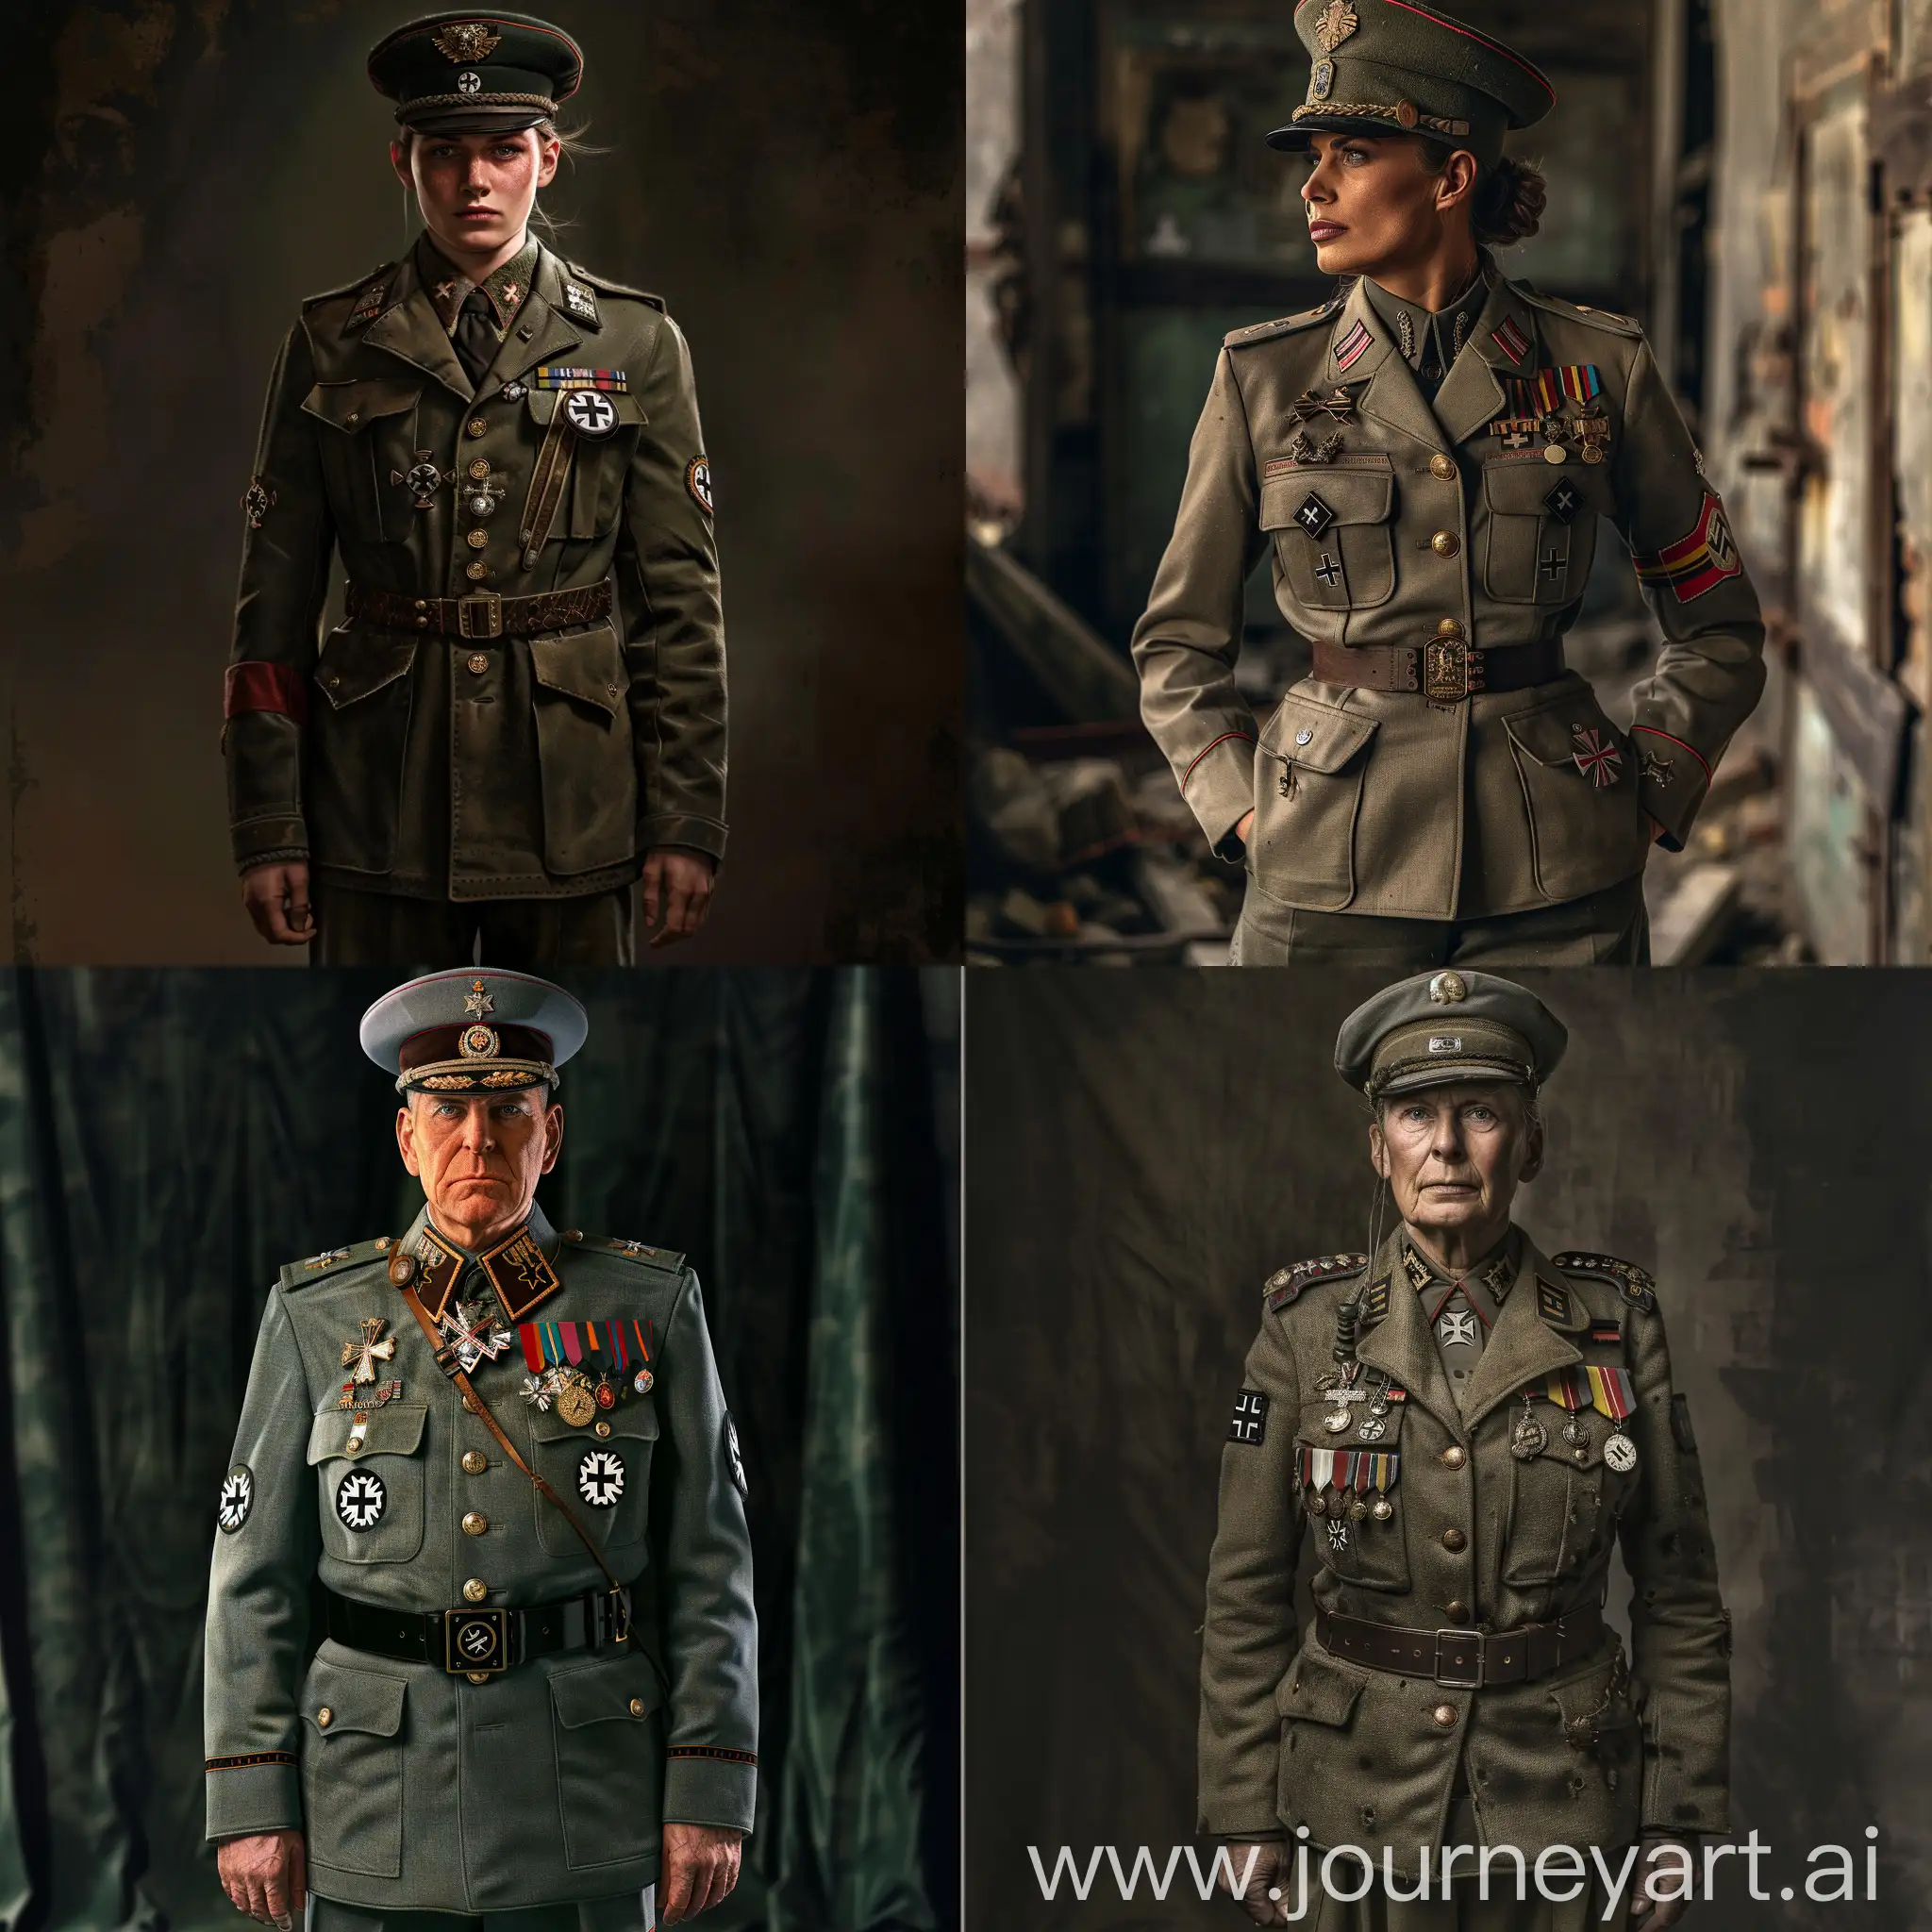 Generate a description of a person dressed in the German military uniform from World War II, including the specific elements of the uniform such as the style of the jacket, pants, hat, and any additional details like medals or insignia."